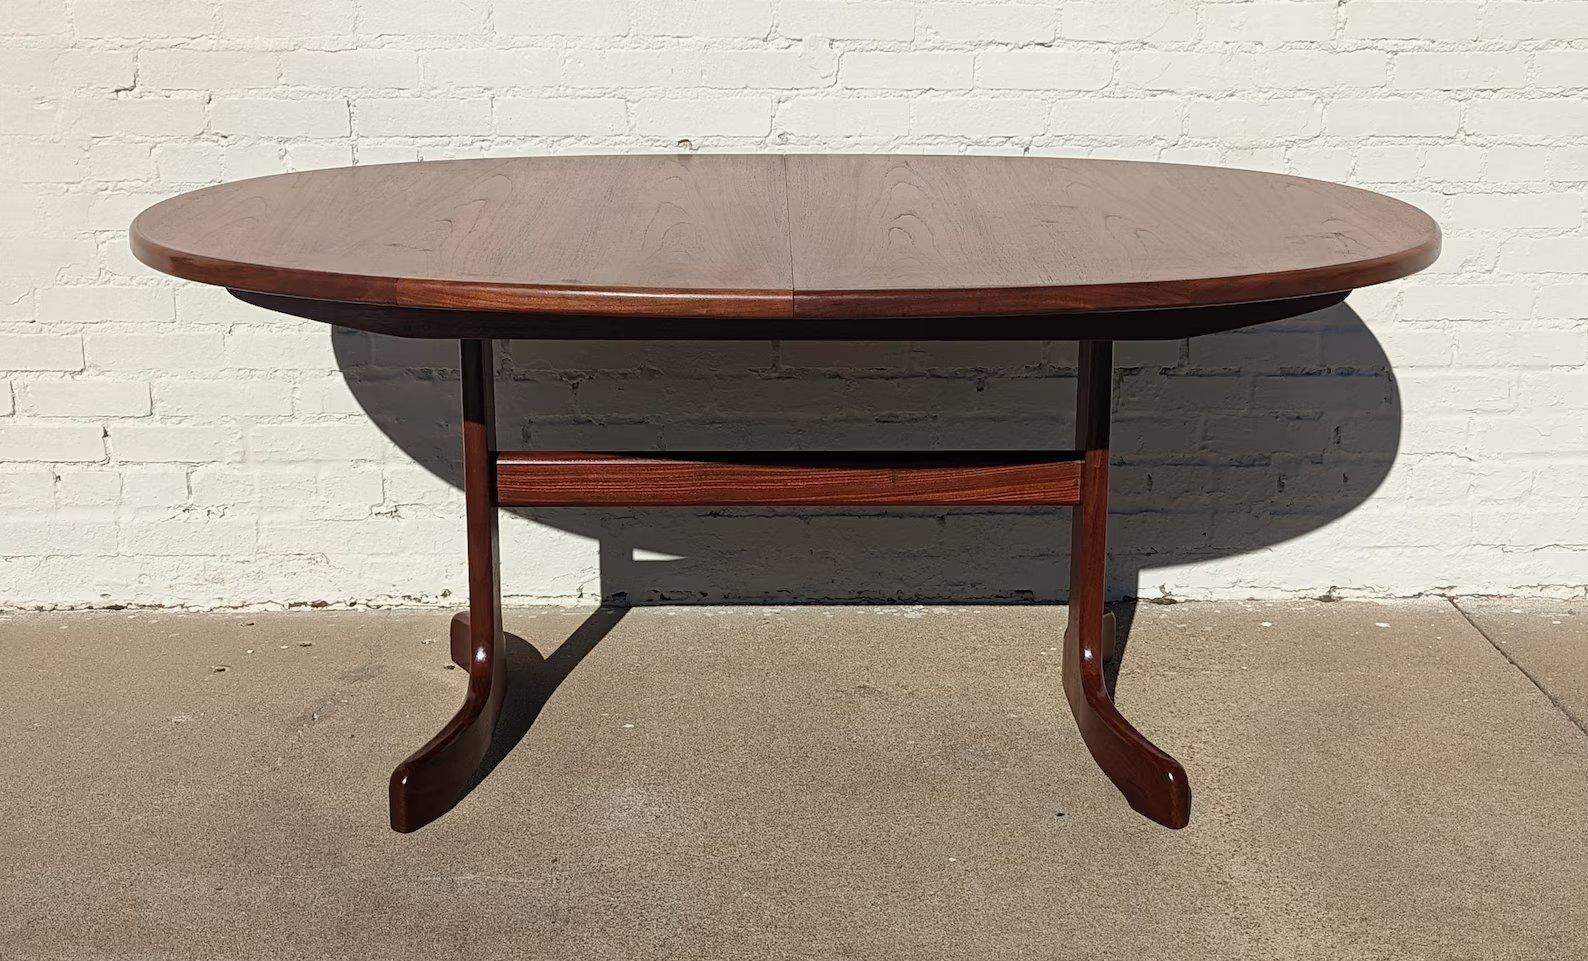 Mid Century English Modern G Plan Teak Dining Table

Above average vintage condition and structurally sound. Has some expected slight finish wear and scratching. Outdoor listing pictures might appear slightly darker or more red than the item does